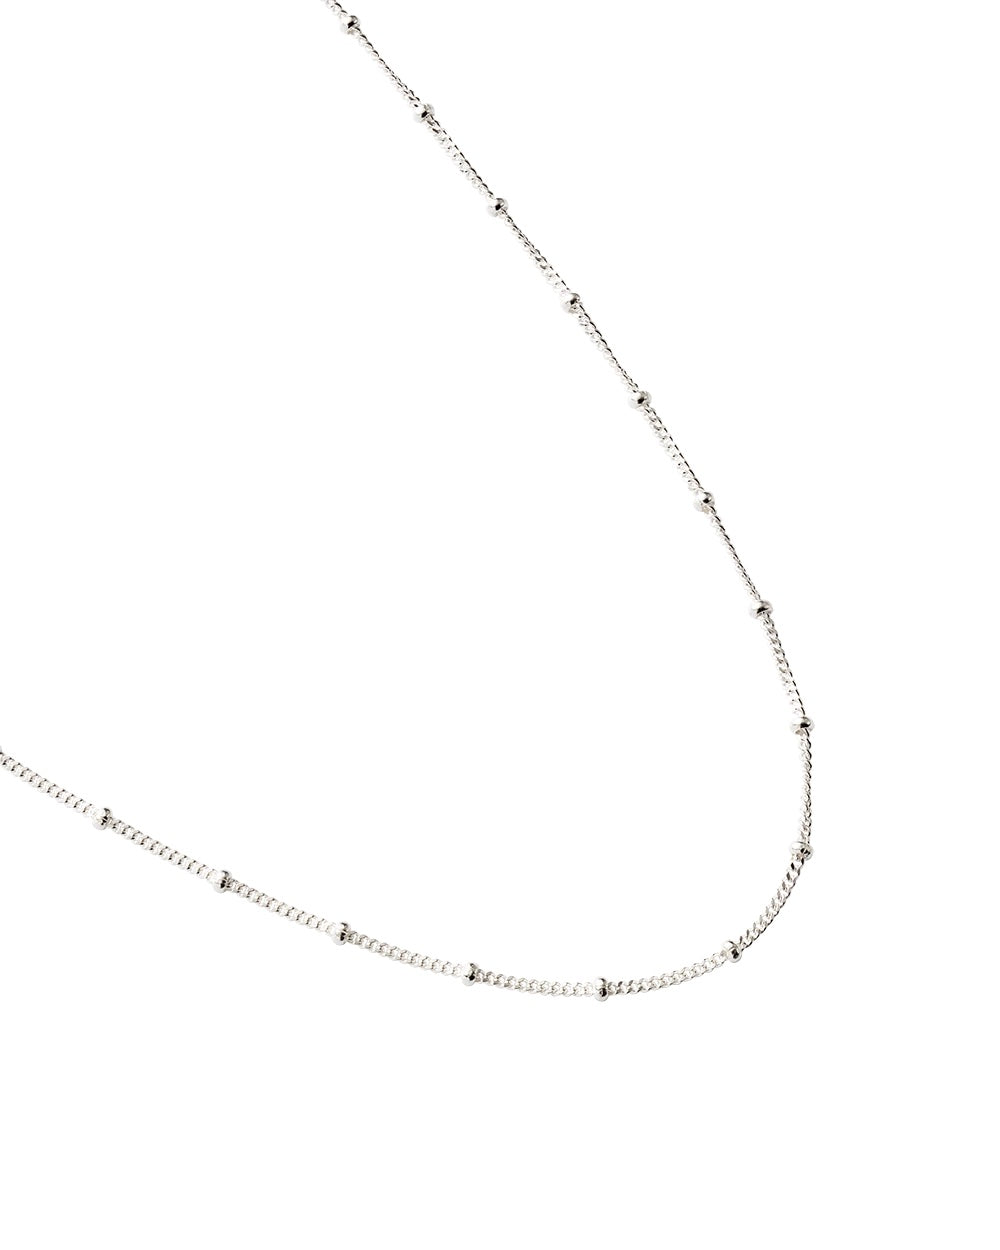 Bespoke Ball Chain 18-20" Sterling Silver - ACCESSORIES